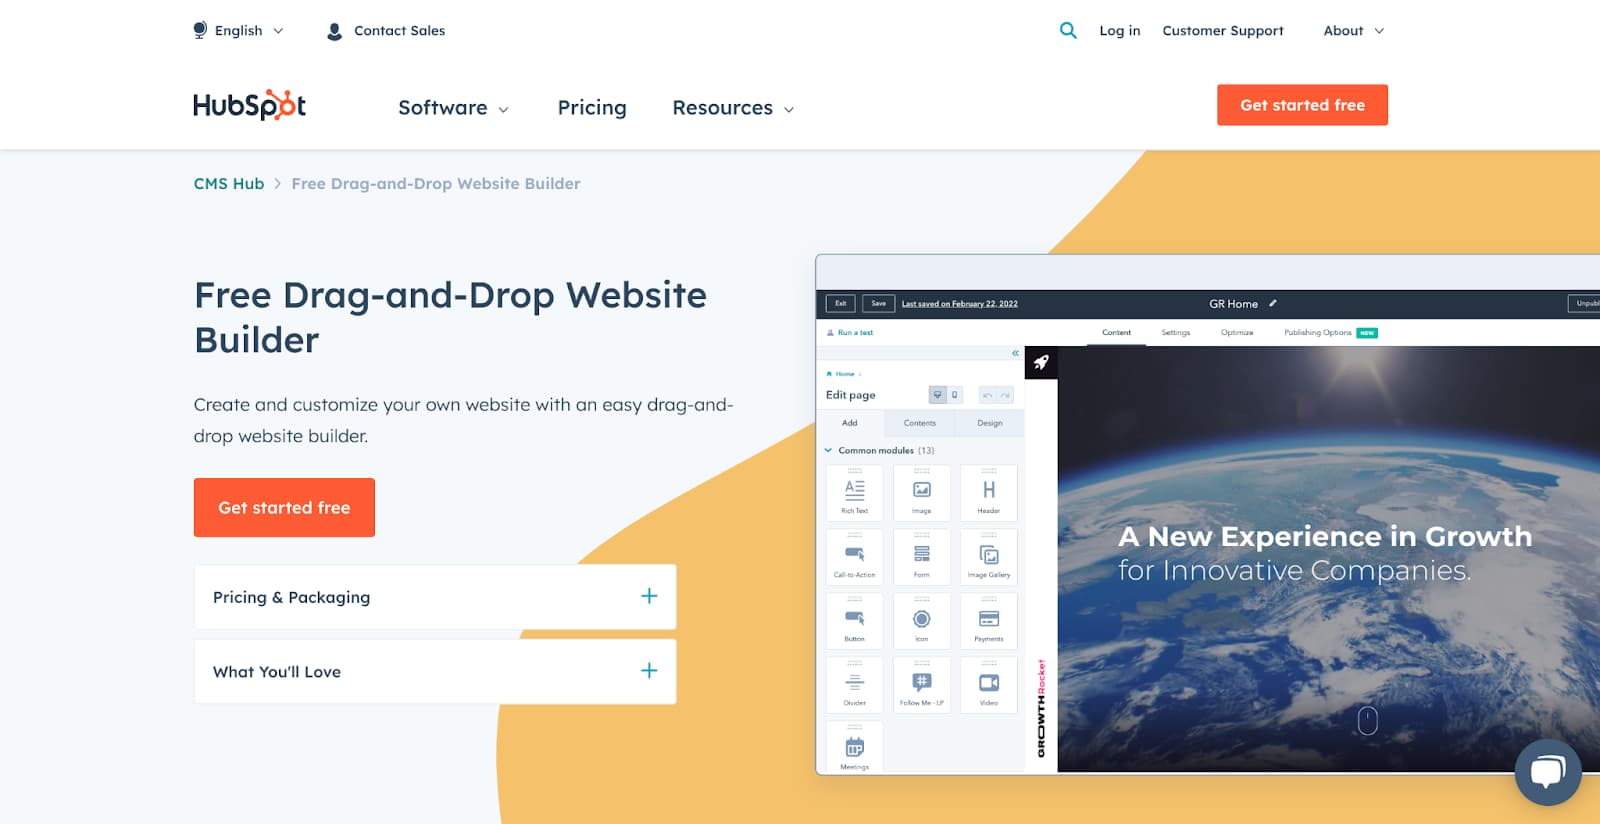 HubSpot Web Builder.jpg?width=1600&name=HubSpot Web Builder - 17 of the Best Free Website Builders to Check Out in 2023